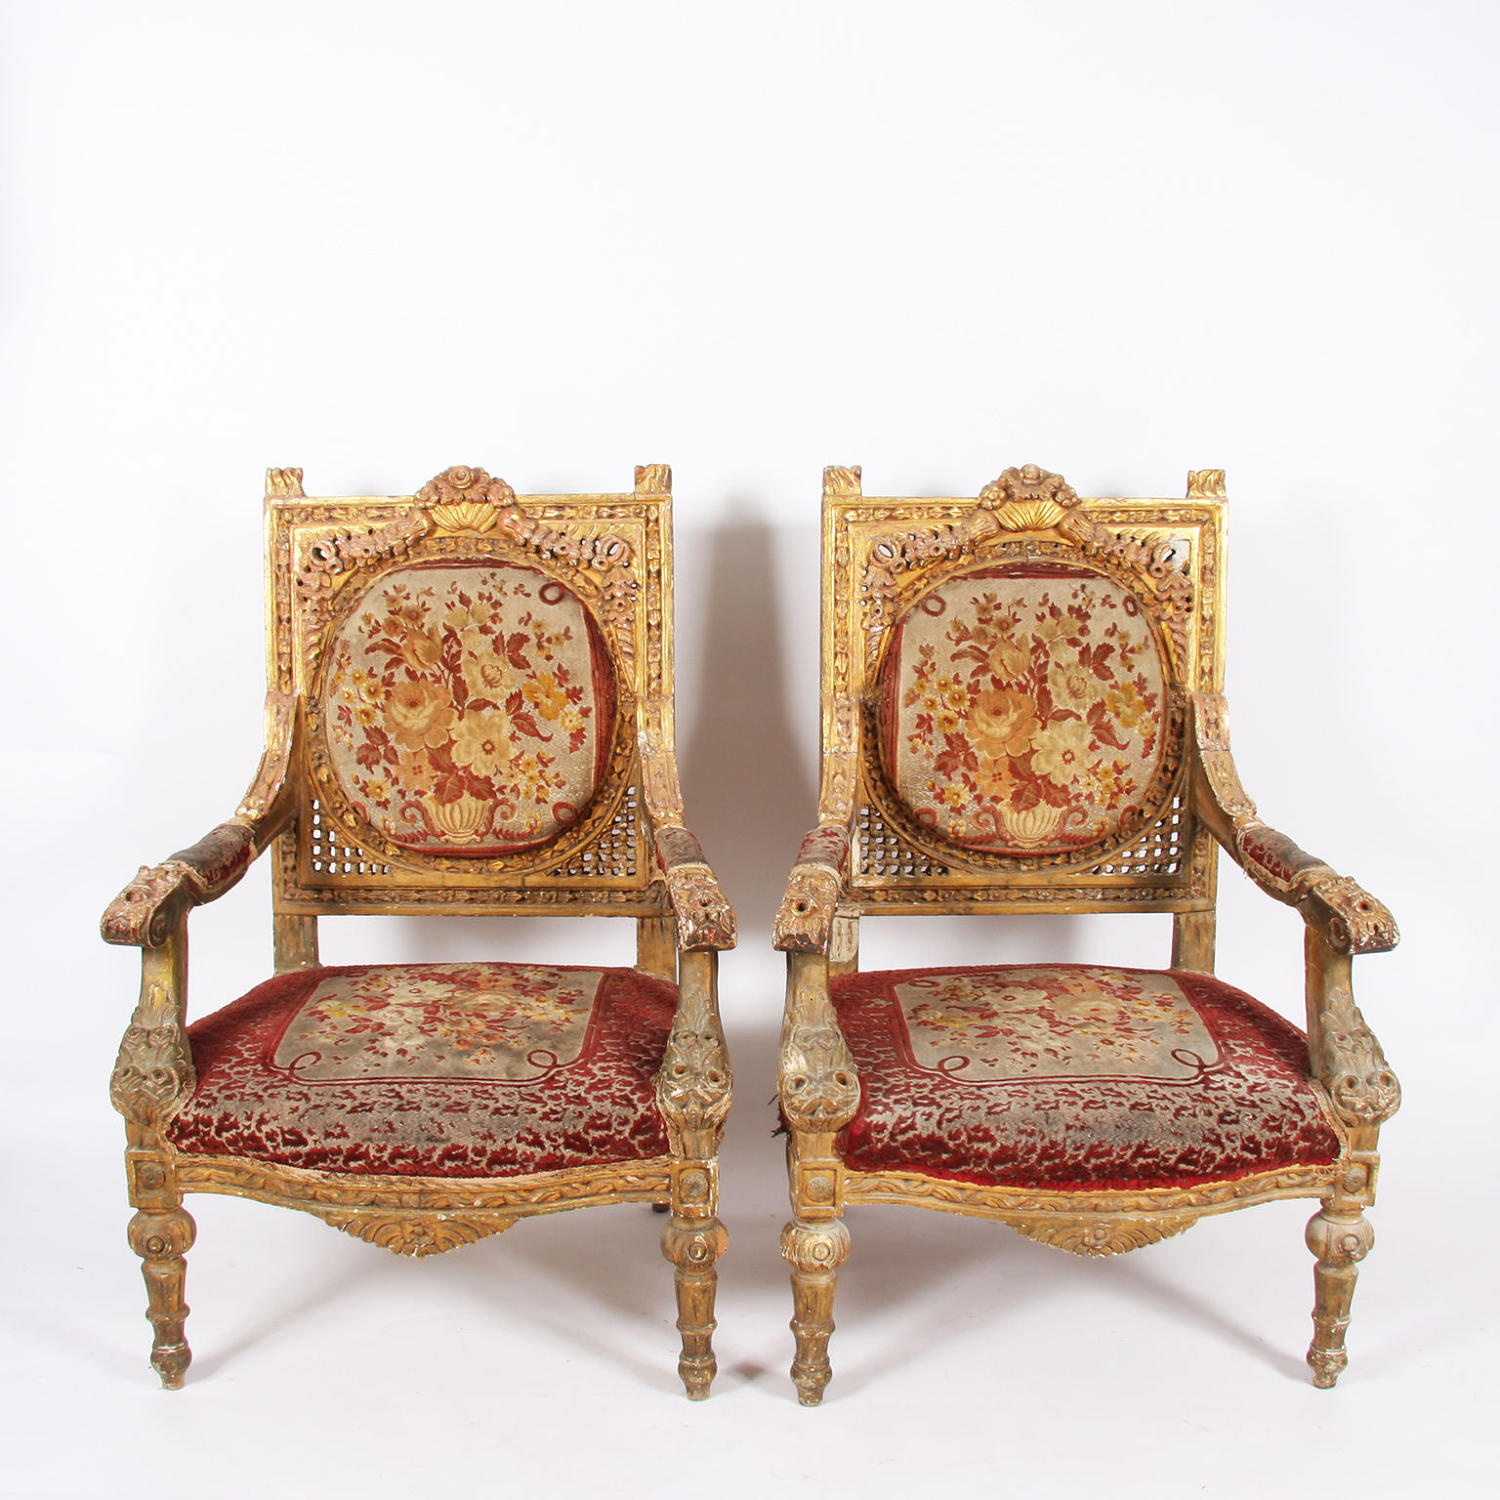 Pair of Giltwood and Velvet Thrones